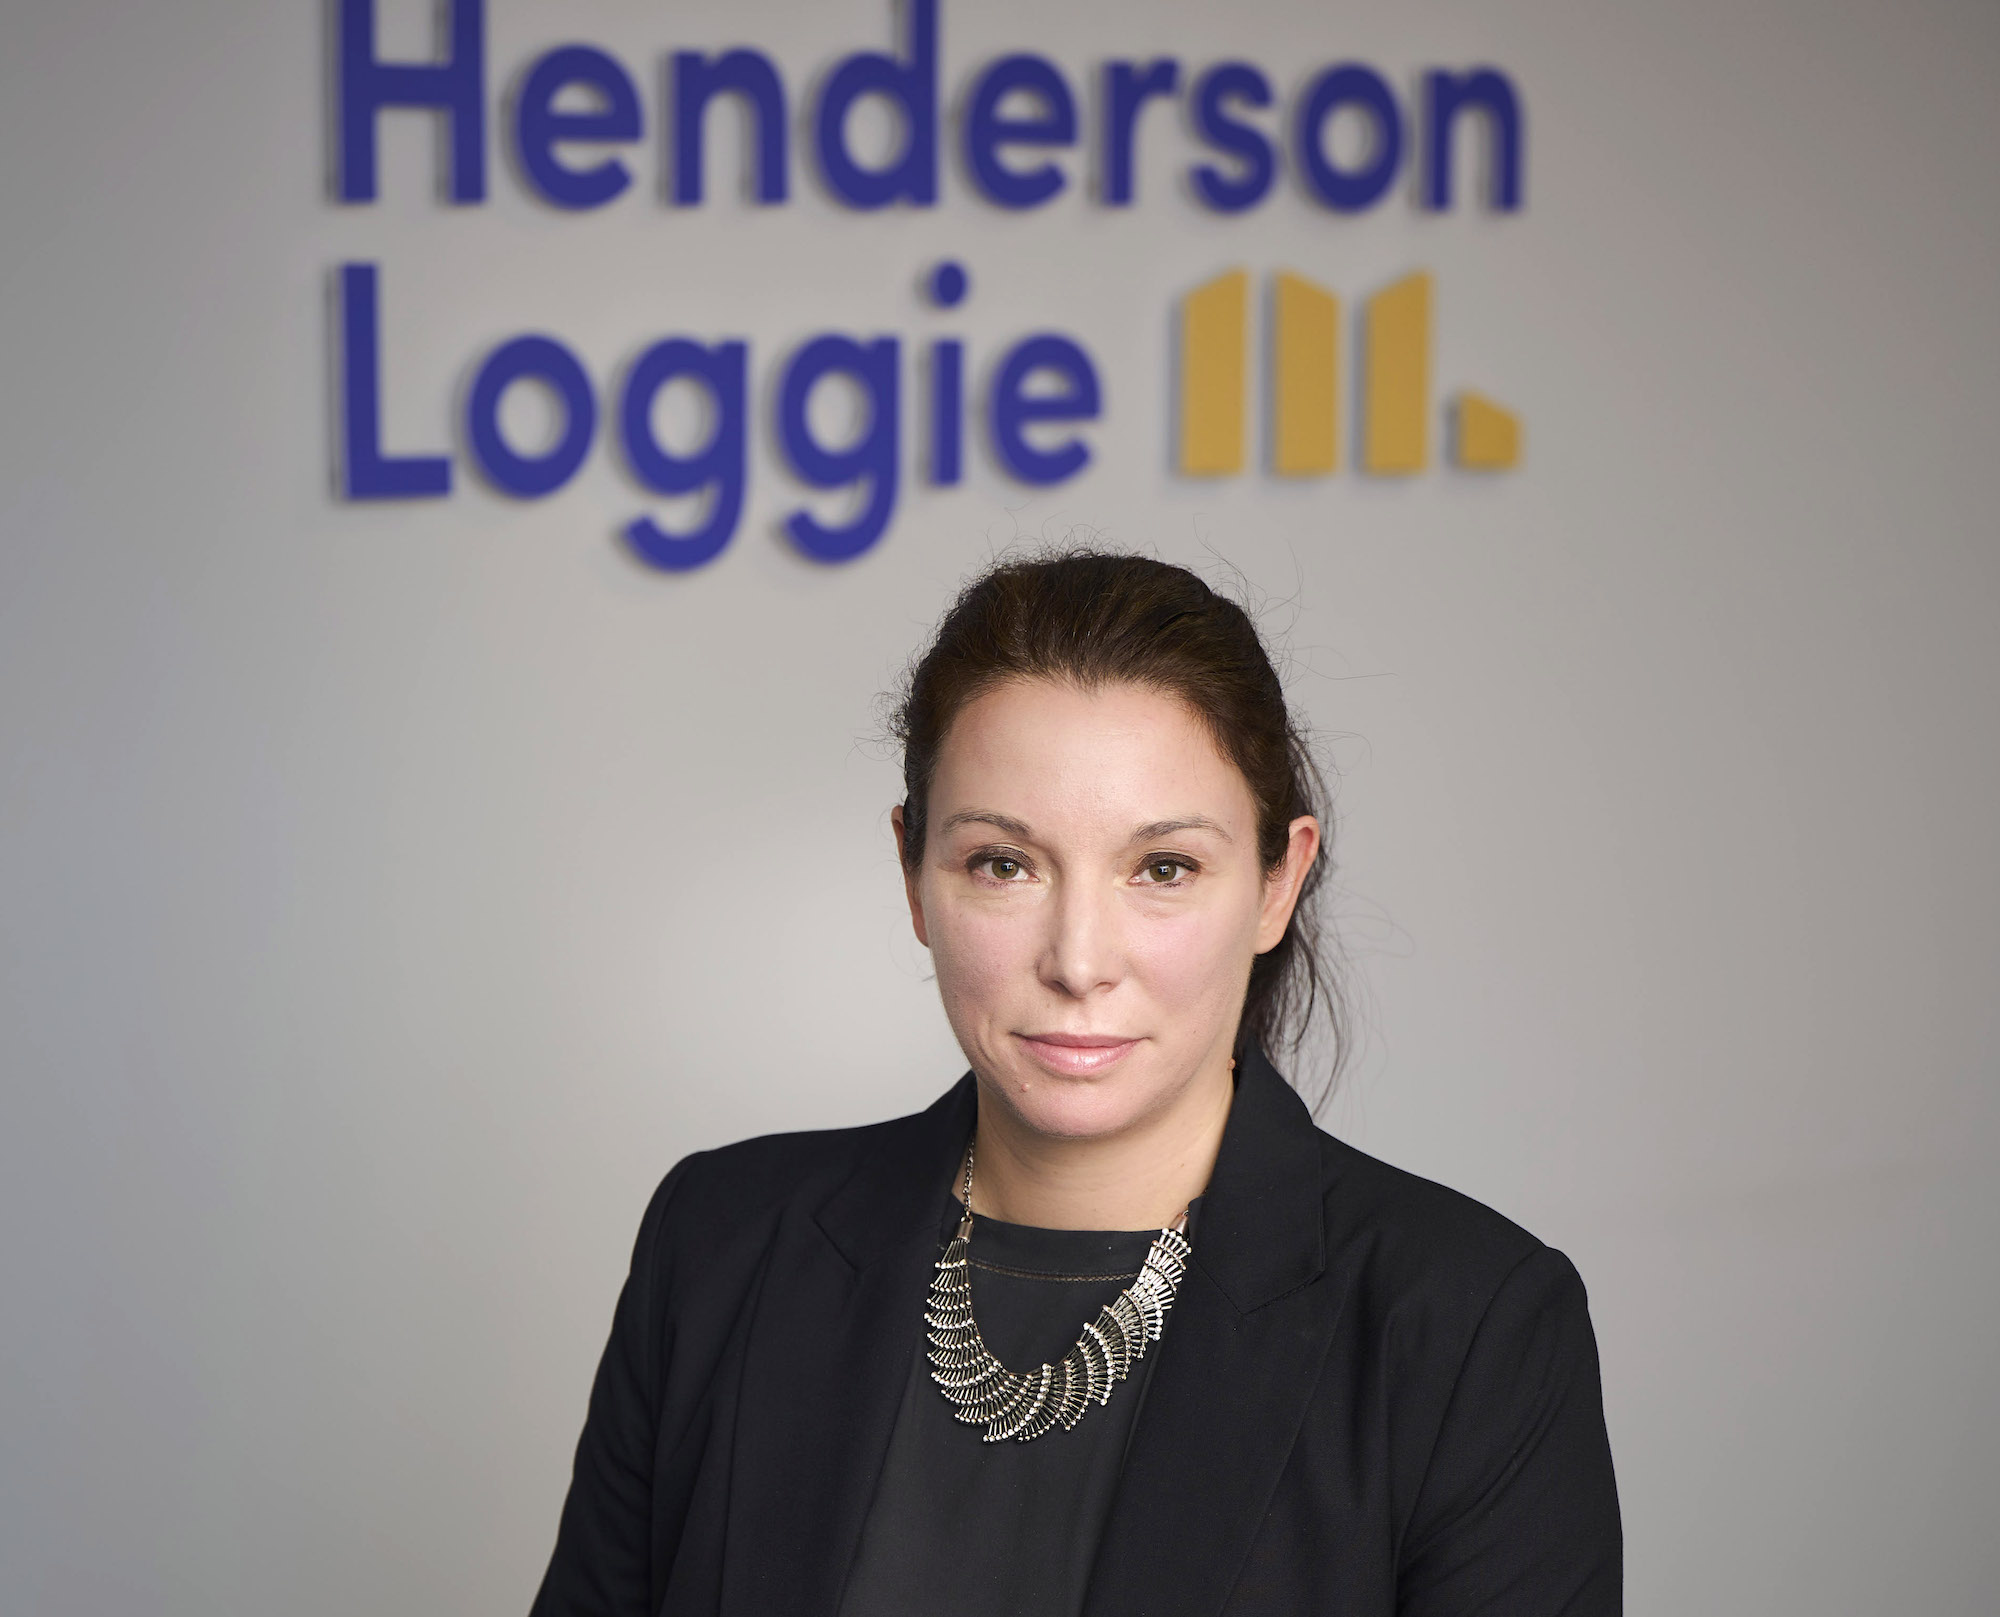 Henderson Loggie appointed joint administrator to failed office furniture firm